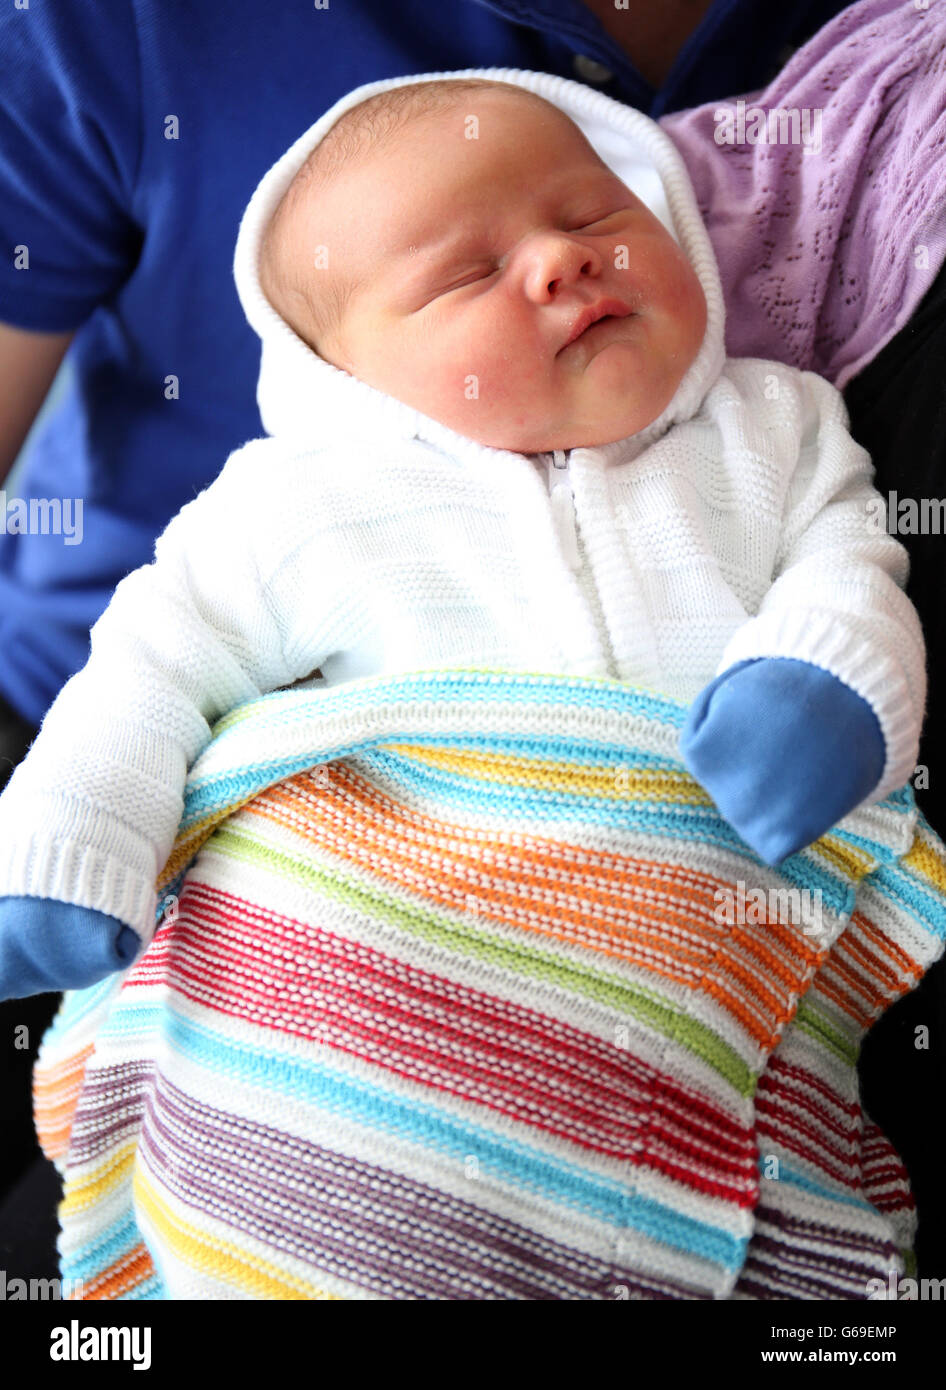 First time parents Carleen and Conor Maginn, from Crumlin in Co Antrim, with son James, who was born yesterday on the same day as The Duke and Duchess of Cambridge's son, weighing 8Lb 10 oz, at the Royal Victoria hospital, in Belfast. Stock Photo